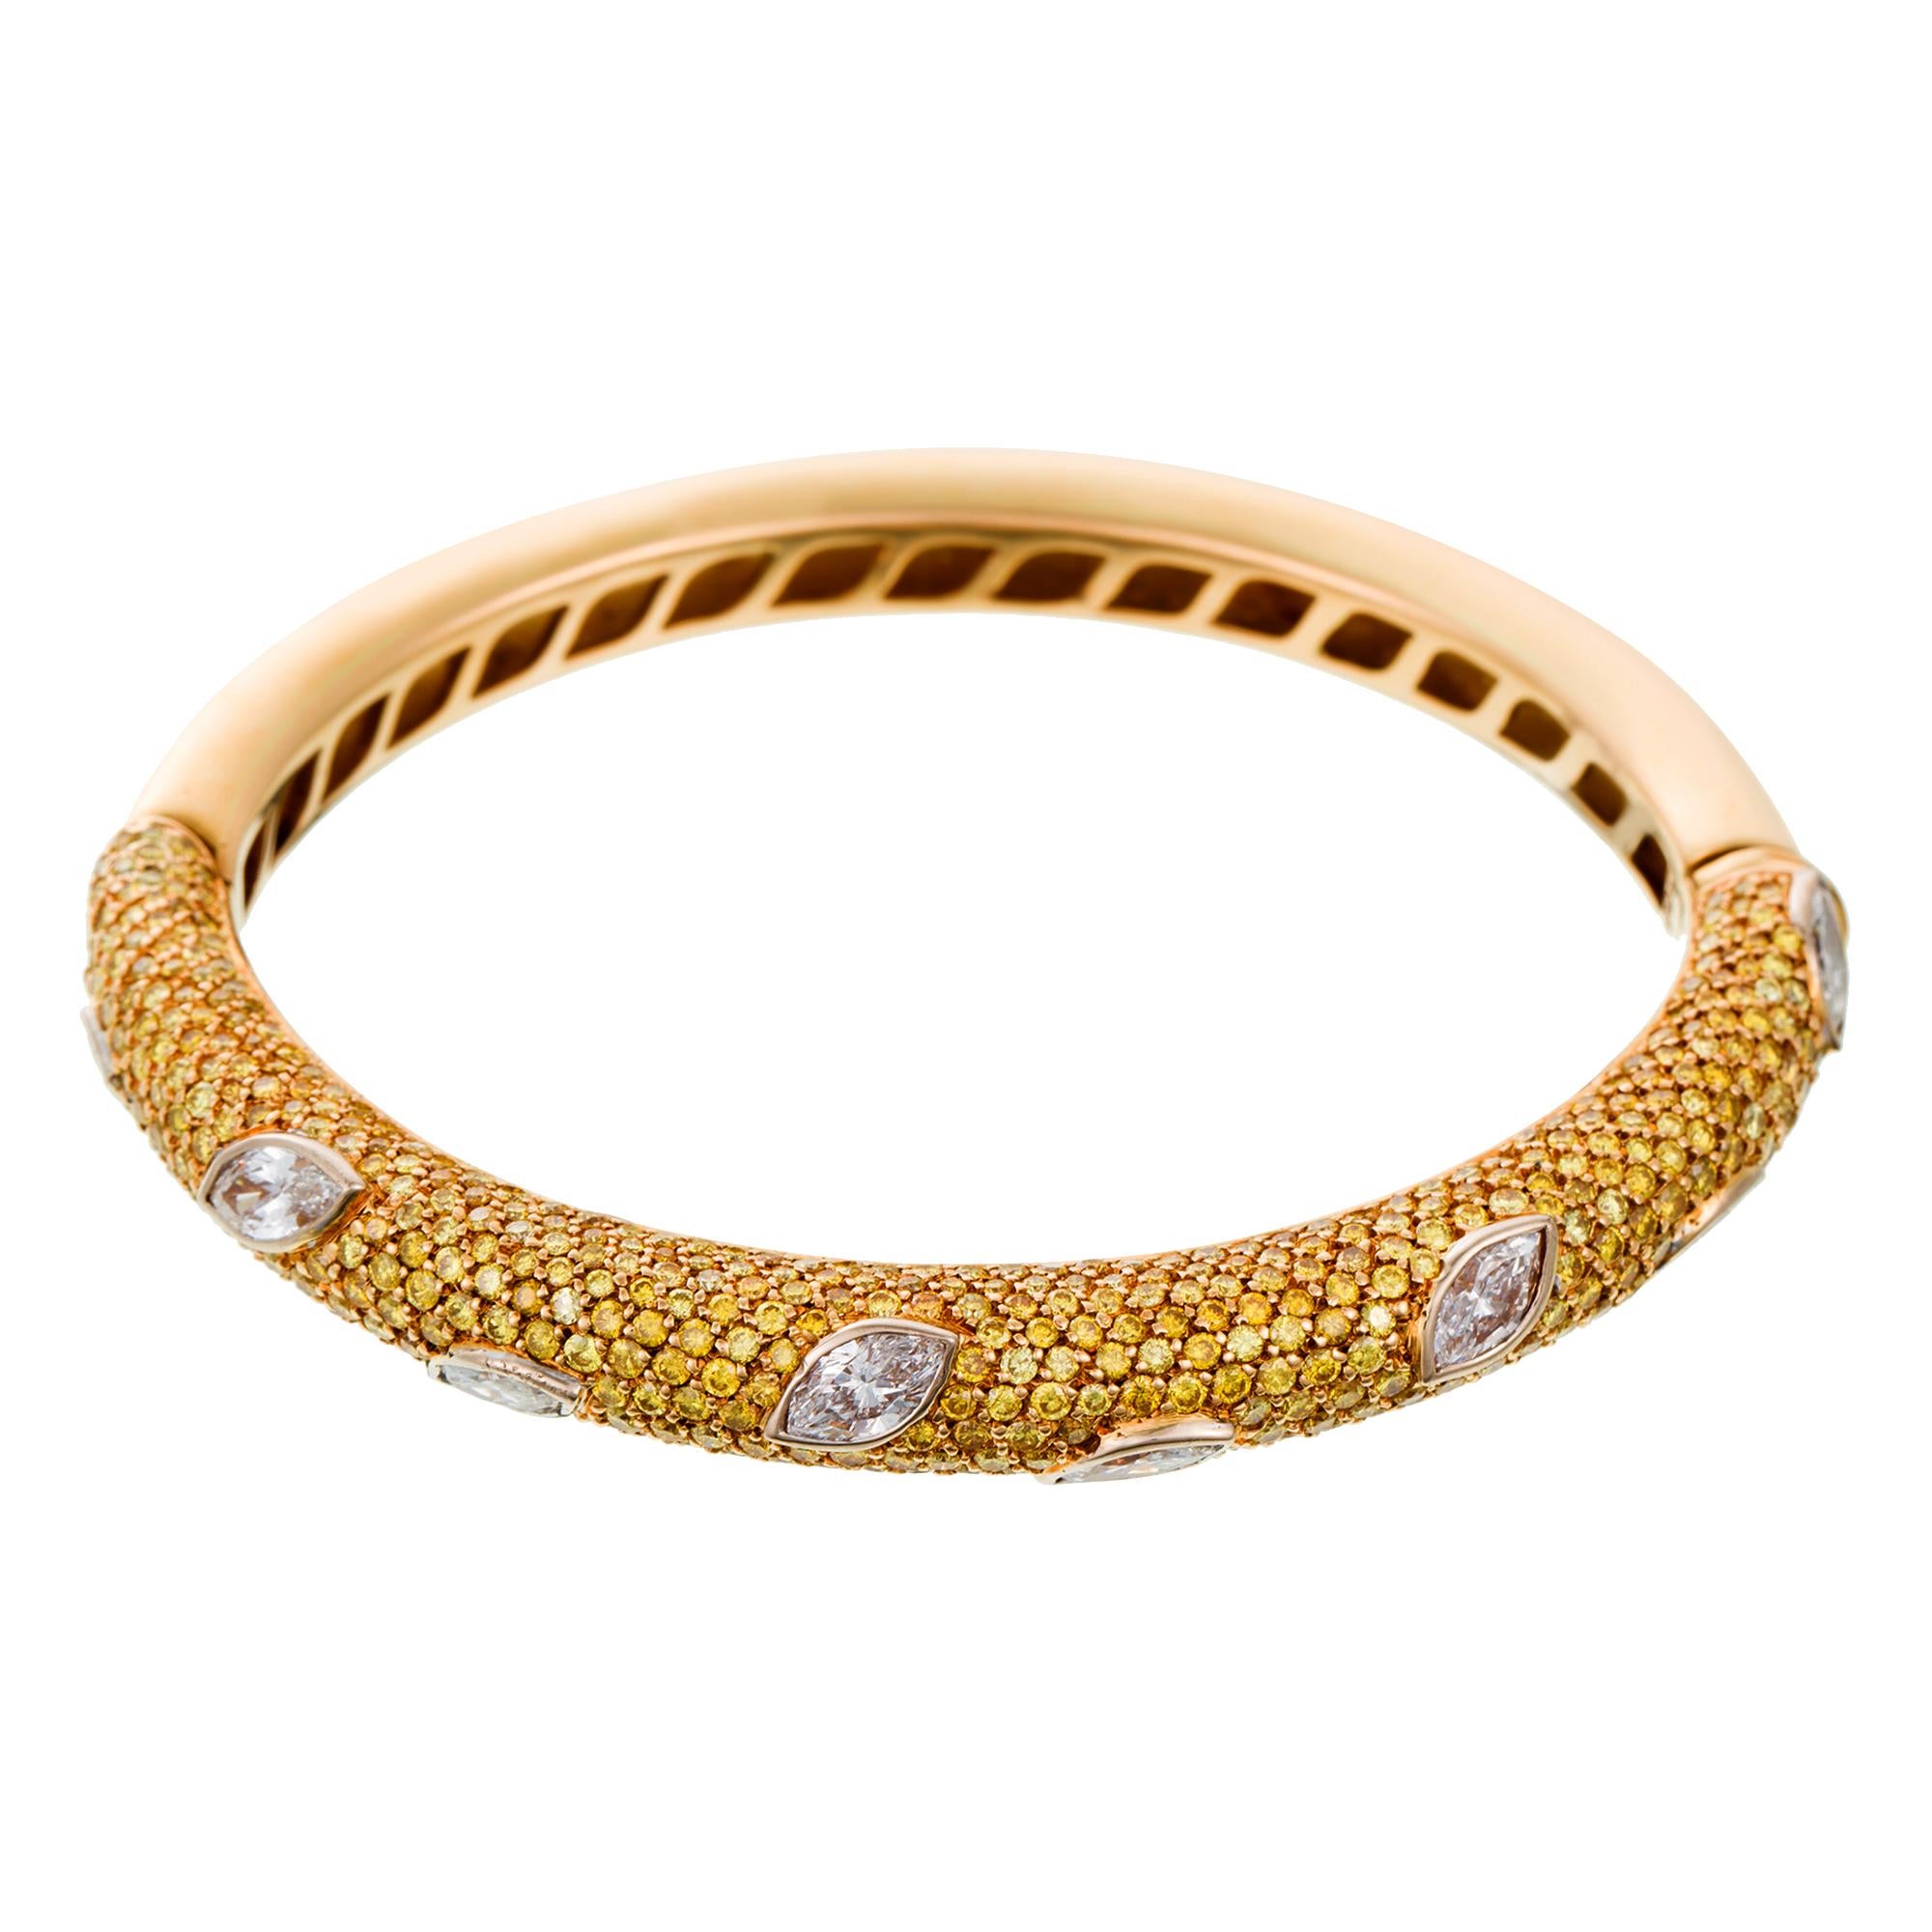 Inject your jewellery look with some signature David Morris colour with this beautiful yellow diamond and white diamond bangle from the renowned London jewellery house.

This one-of-a-kind split bangle is crafted in yellow gold, half of which is set